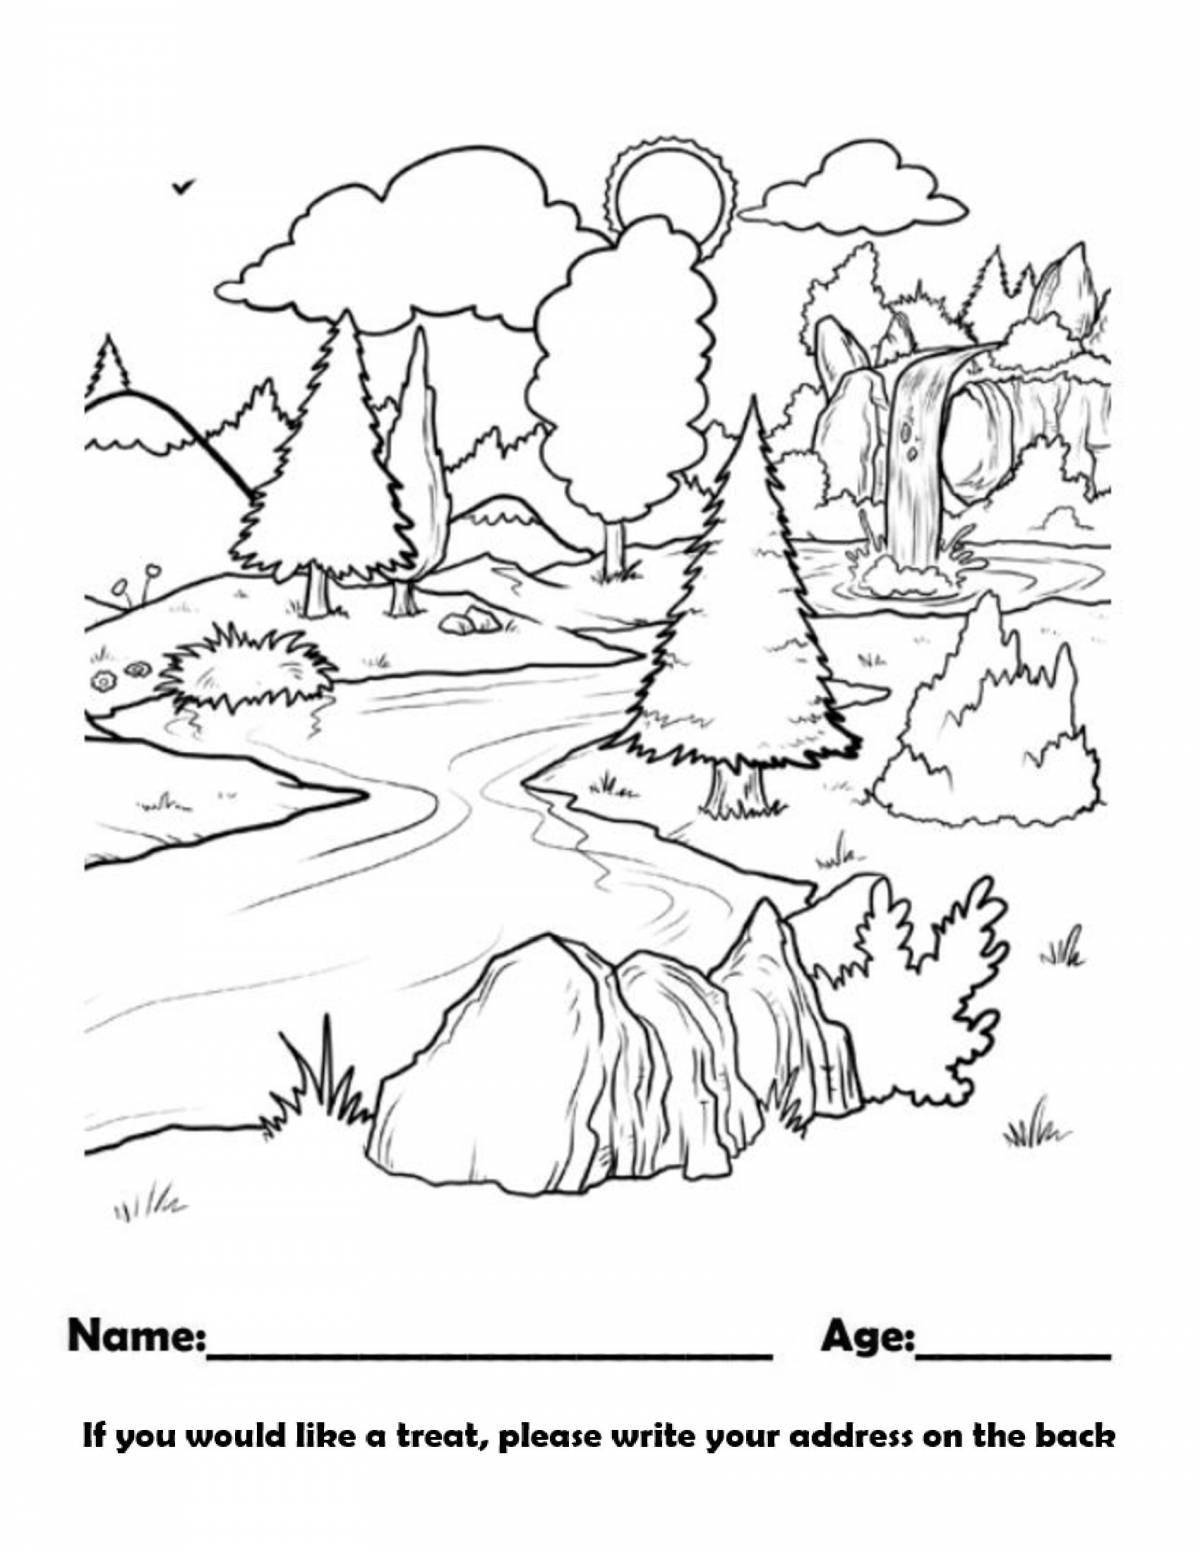 Amazing nature coloring book for 10 year olds